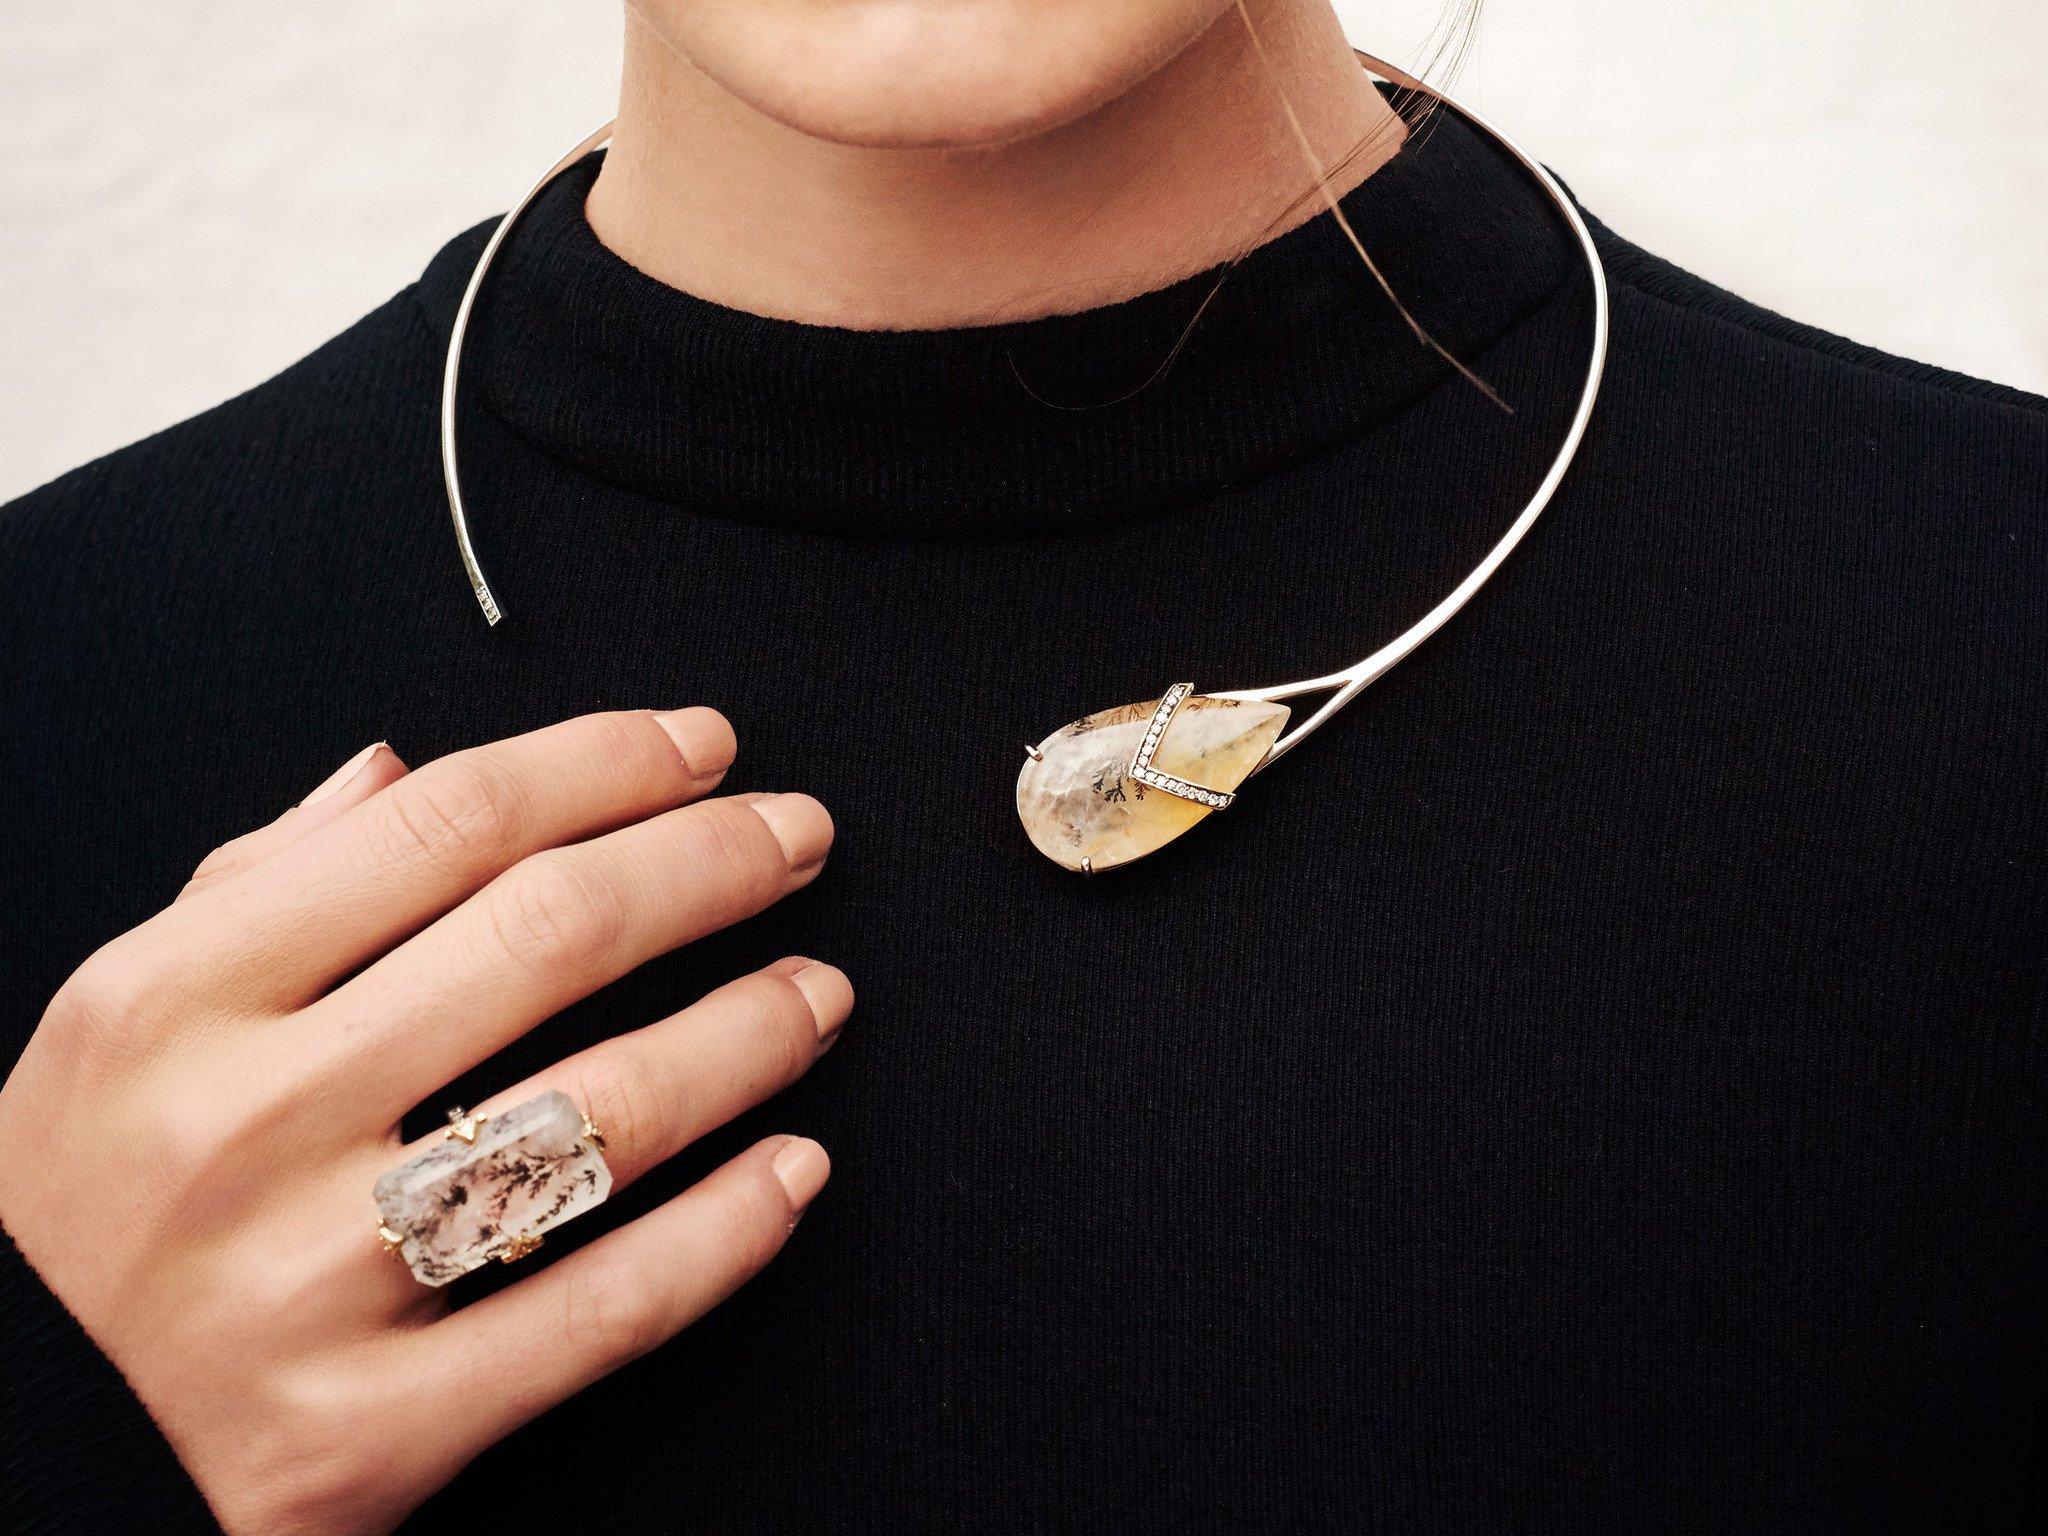 MANIAMANIA Phenomena Neckpiece in Sterling silver with large Pear shaped Dendrite Quartz stone, set with 14k yellow gold band setting with a pavé of white diamonds,  and white diamond detail on end.

This mixed metal statement neckpiece was hand